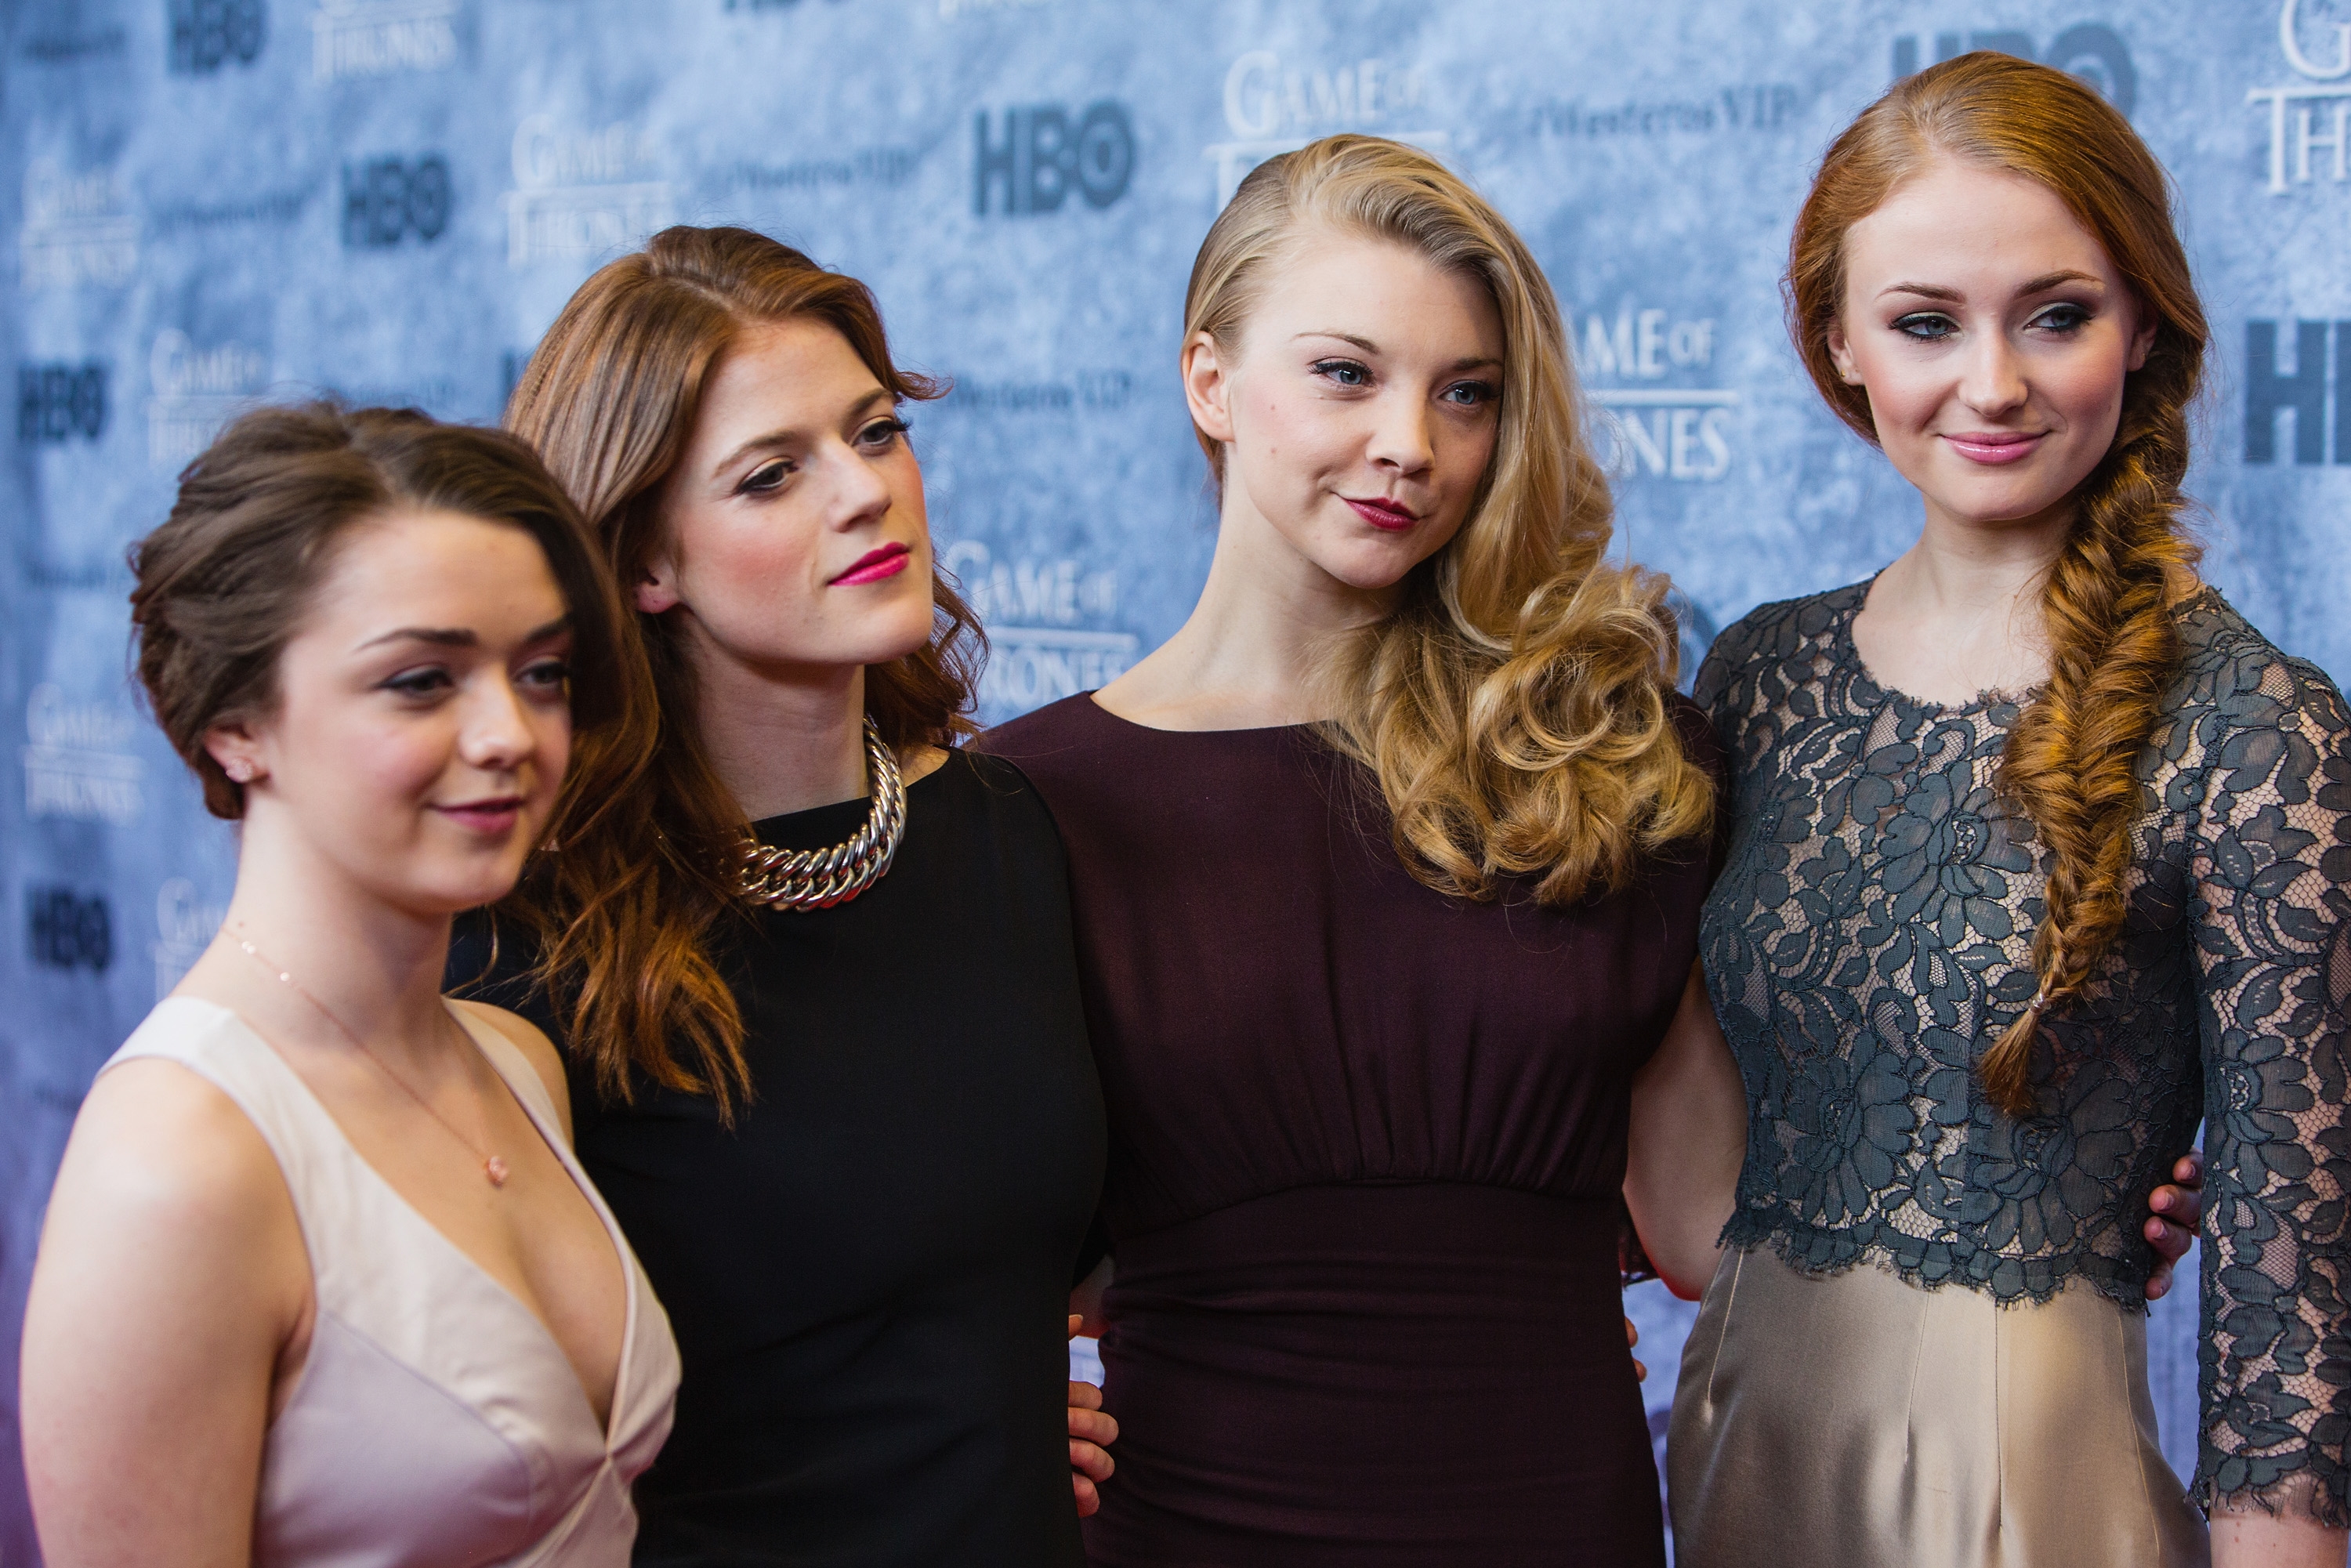 https://maisiewilliams.org/gallery/albums/Public Apperances/2013/March 21st-Game of Thrones Season 3 Seattle Premiere/0013.jpg